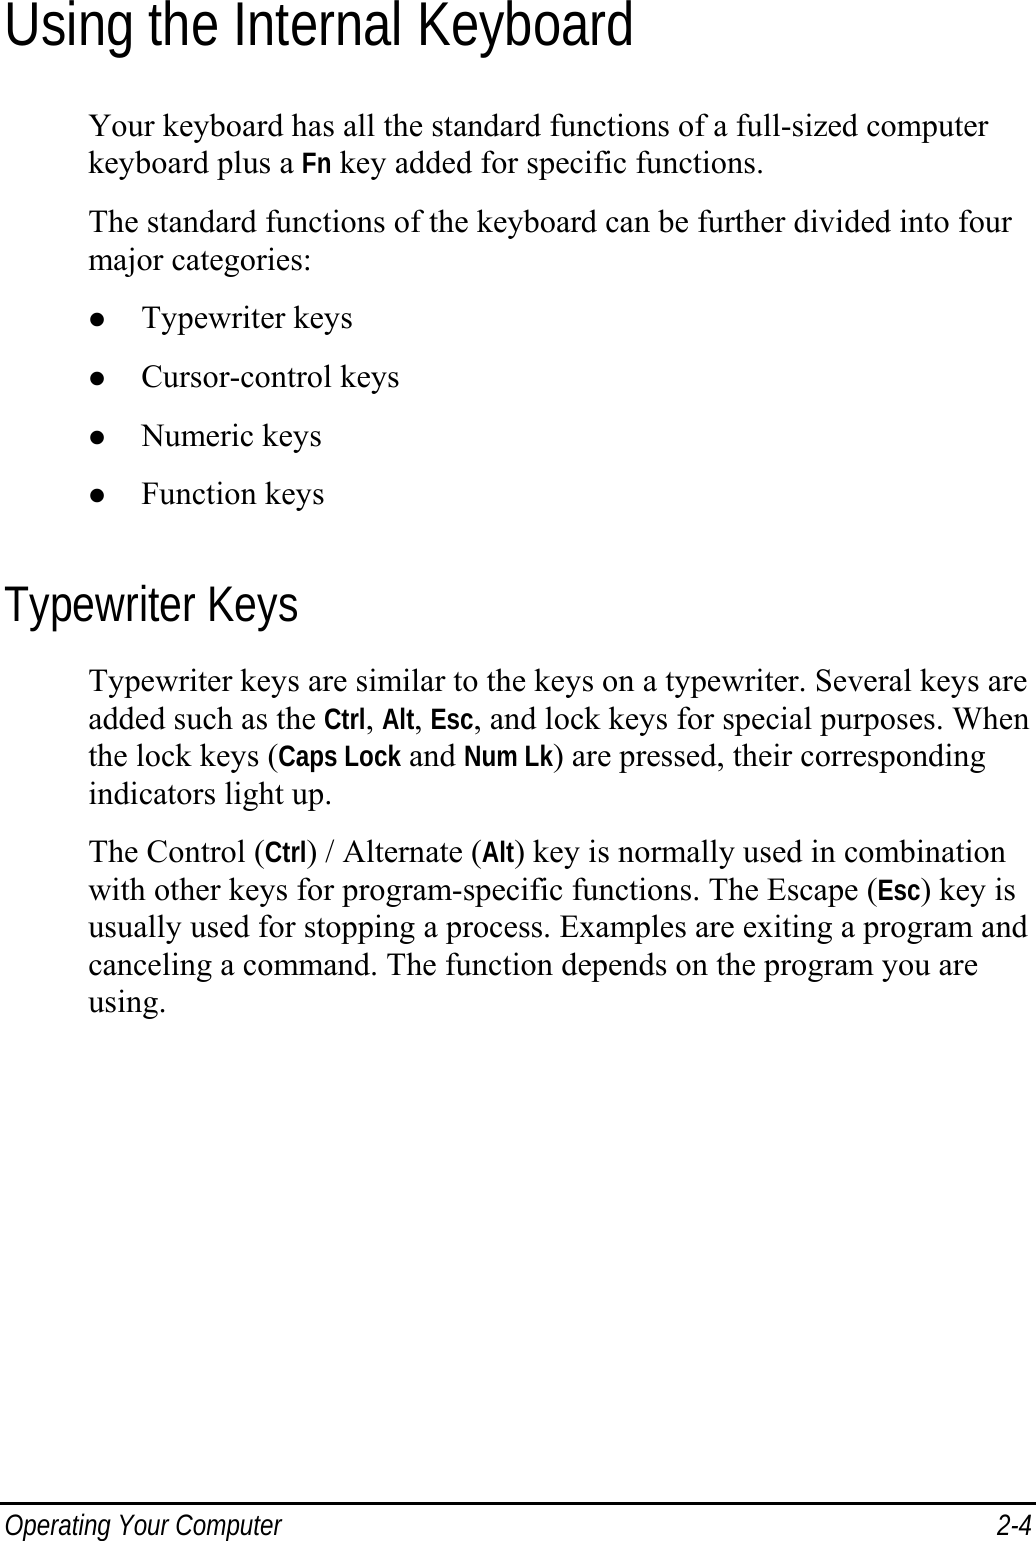  Operating Your Computer  2-4 Using the Internal Keyboard Your keyboard has all the standard functions of a full-sized computer keyboard plus a Fn key added for specific functions. The standard functions of the keyboard can be further divided into four major categories: z Typewriter keys z Cursor-control keys z Numeric keys z Function keys Typewriter Keys Typewriter keys are similar to the keys on a typewriter. Several keys are added such as the Ctrl, Alt, Esc, and lock keys for special purposes. When the lock keys (Caps Lock and Num Lk) are pressed, their corresponding indicators light up. The Control (Ctrl) / Alternate (Alt) key is normally used in combination with other keys for program-specific functions. The Escape (Esc) key is usually used for stopping a process. Examples are exiting a program and canceling a command. The function depends on the program you are using. 